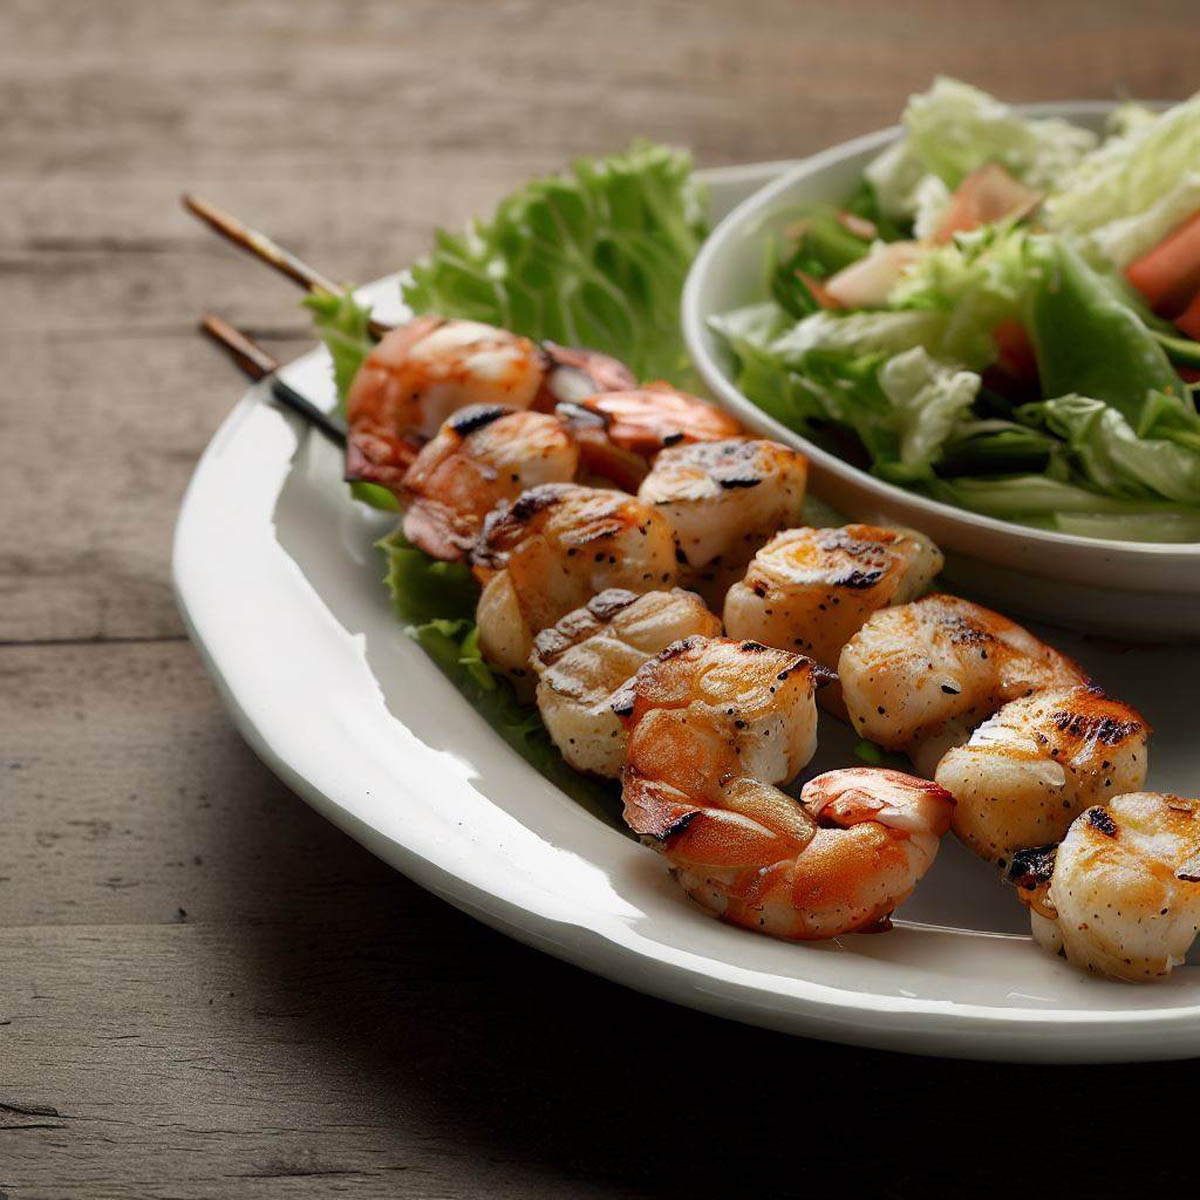 Texas Roadhouse grilled shrimp skewers placed next to a vibrant salad